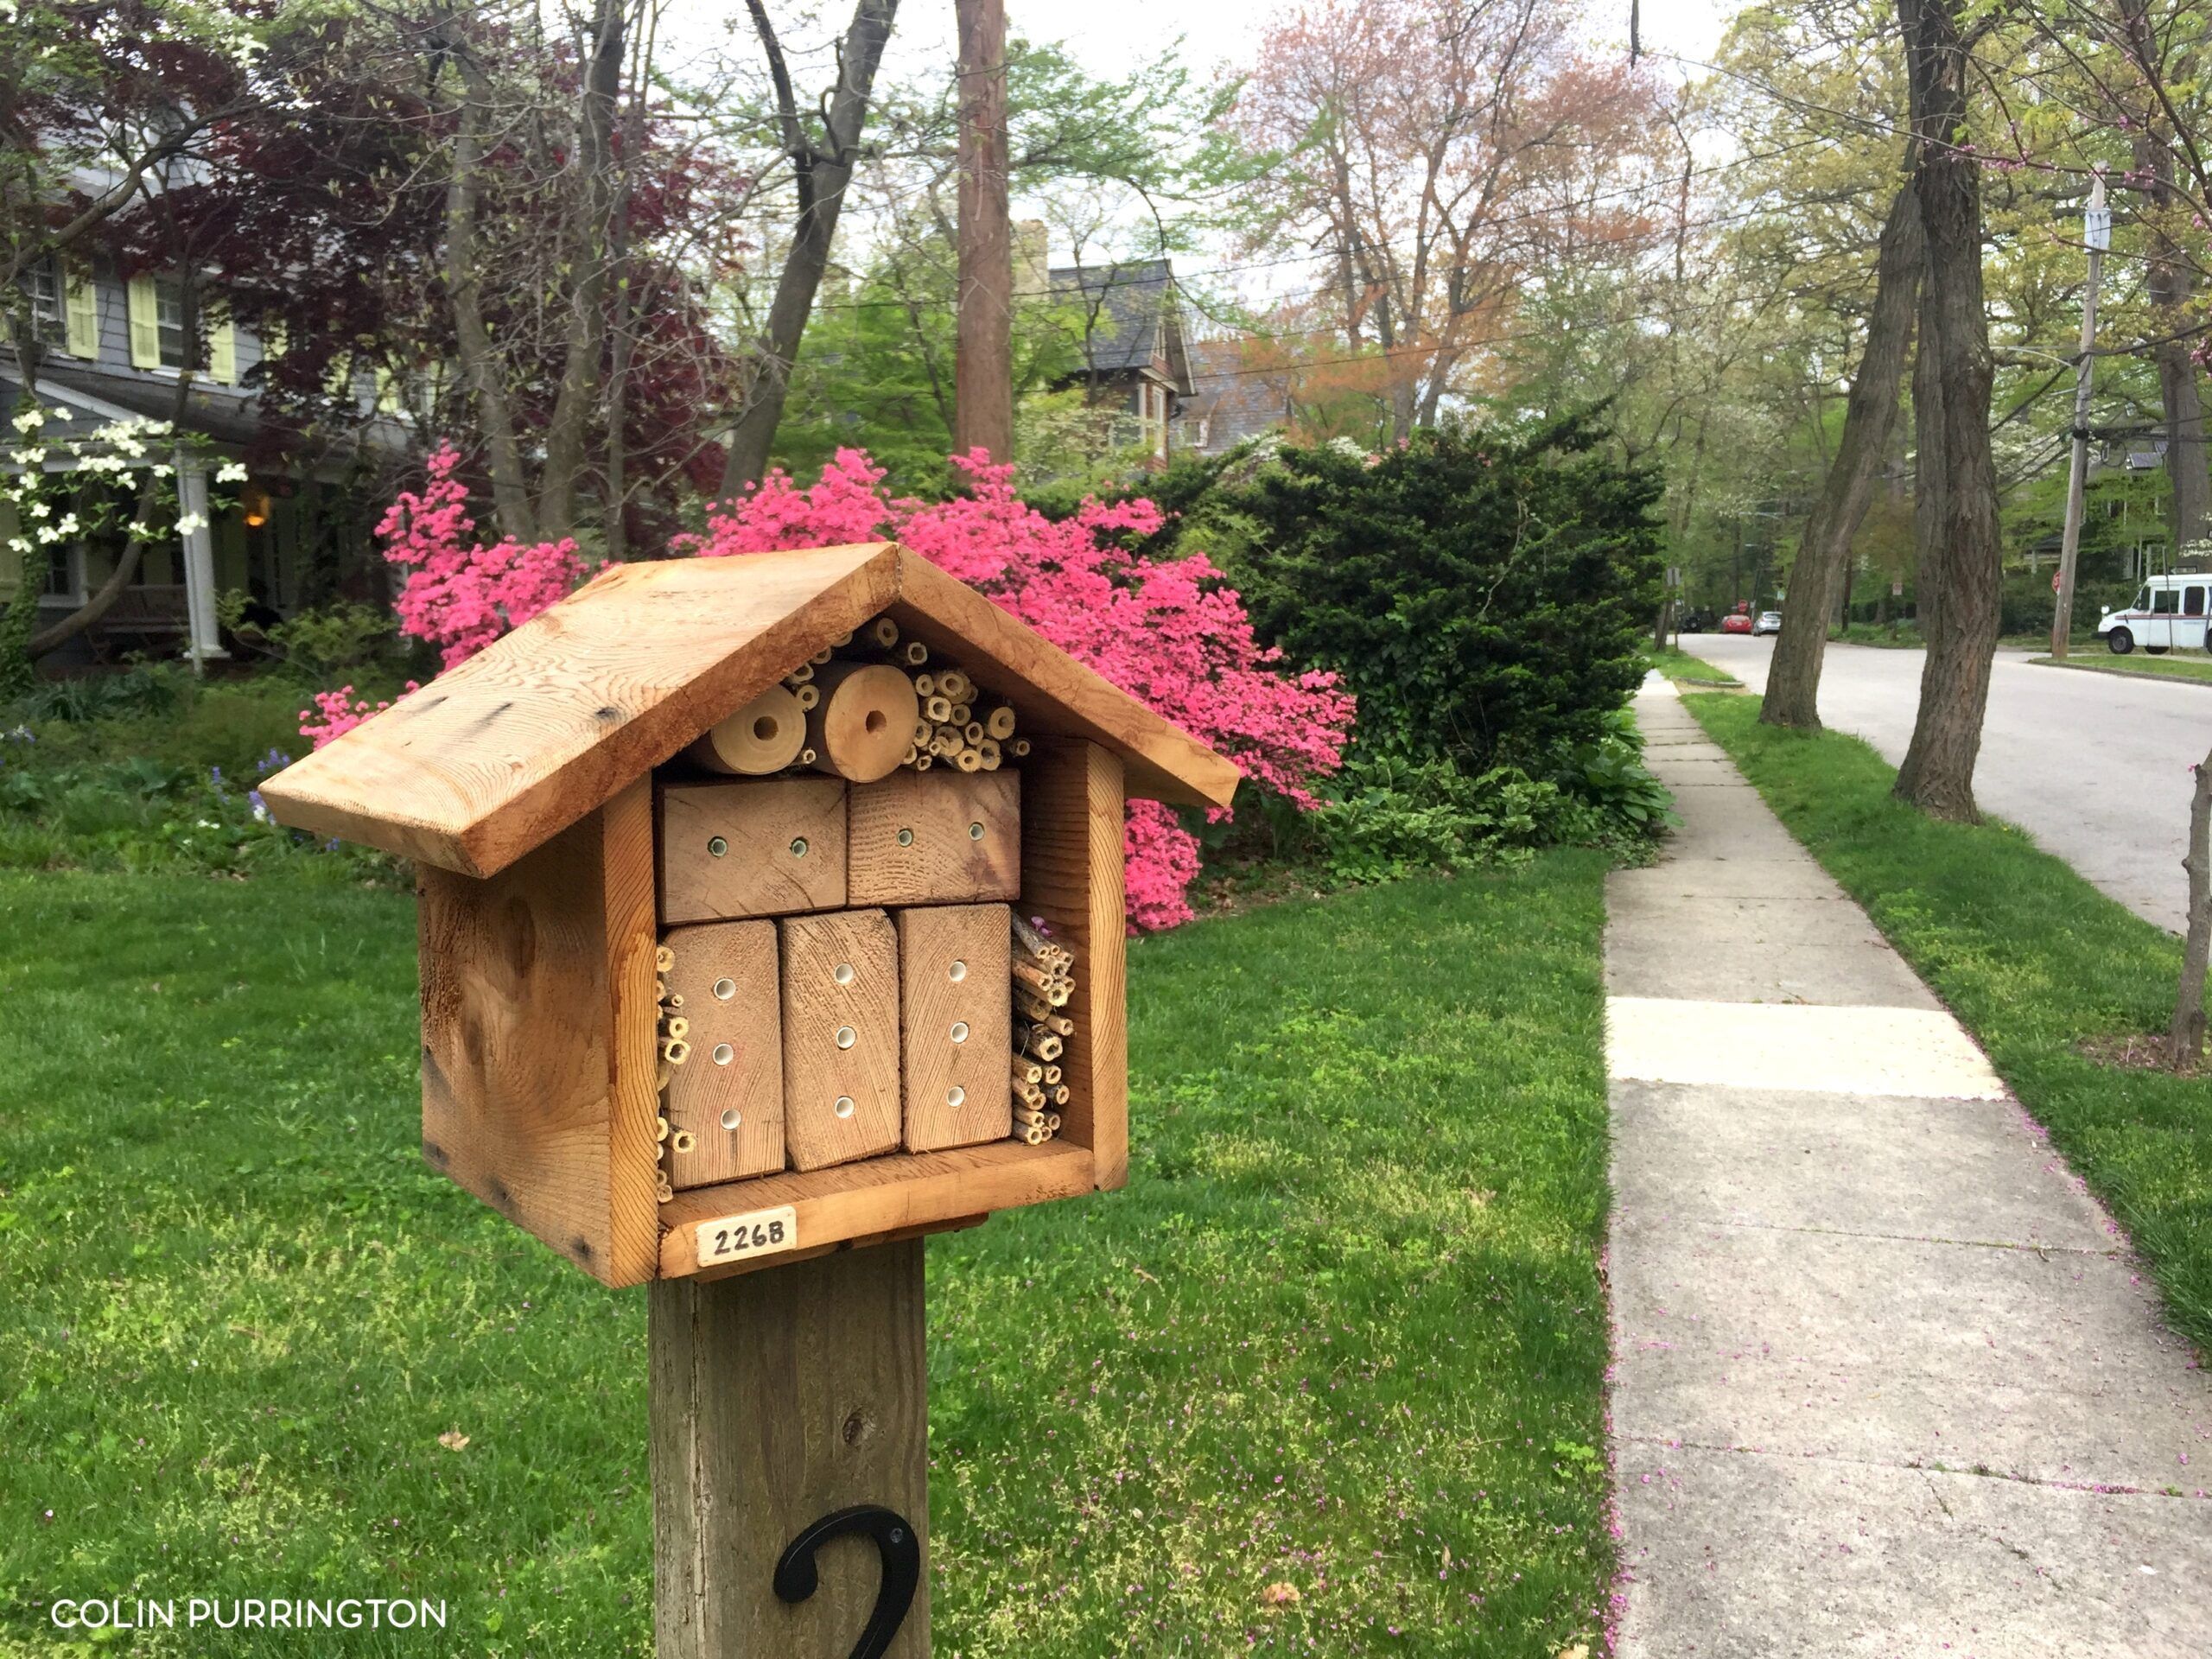 All Natural Bamboo Mason Bee Hive House Help Save The Bee Population!